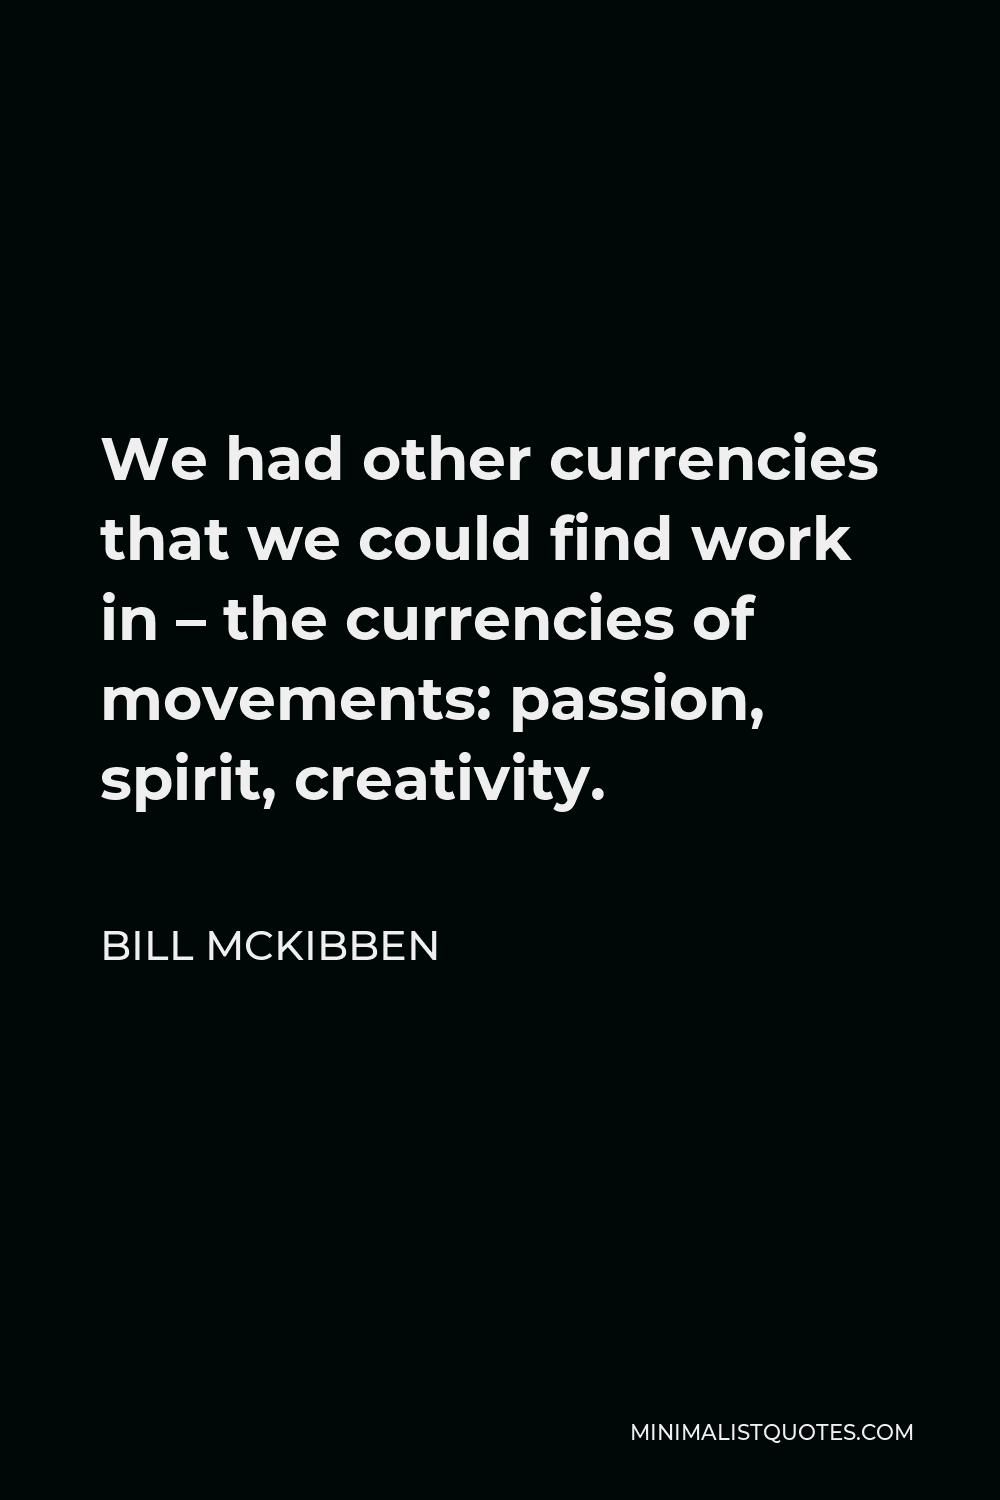 Bill McKibben Quote - We had other currencies that we could find work in – the currencies of movements: passion, spirit, creativity.